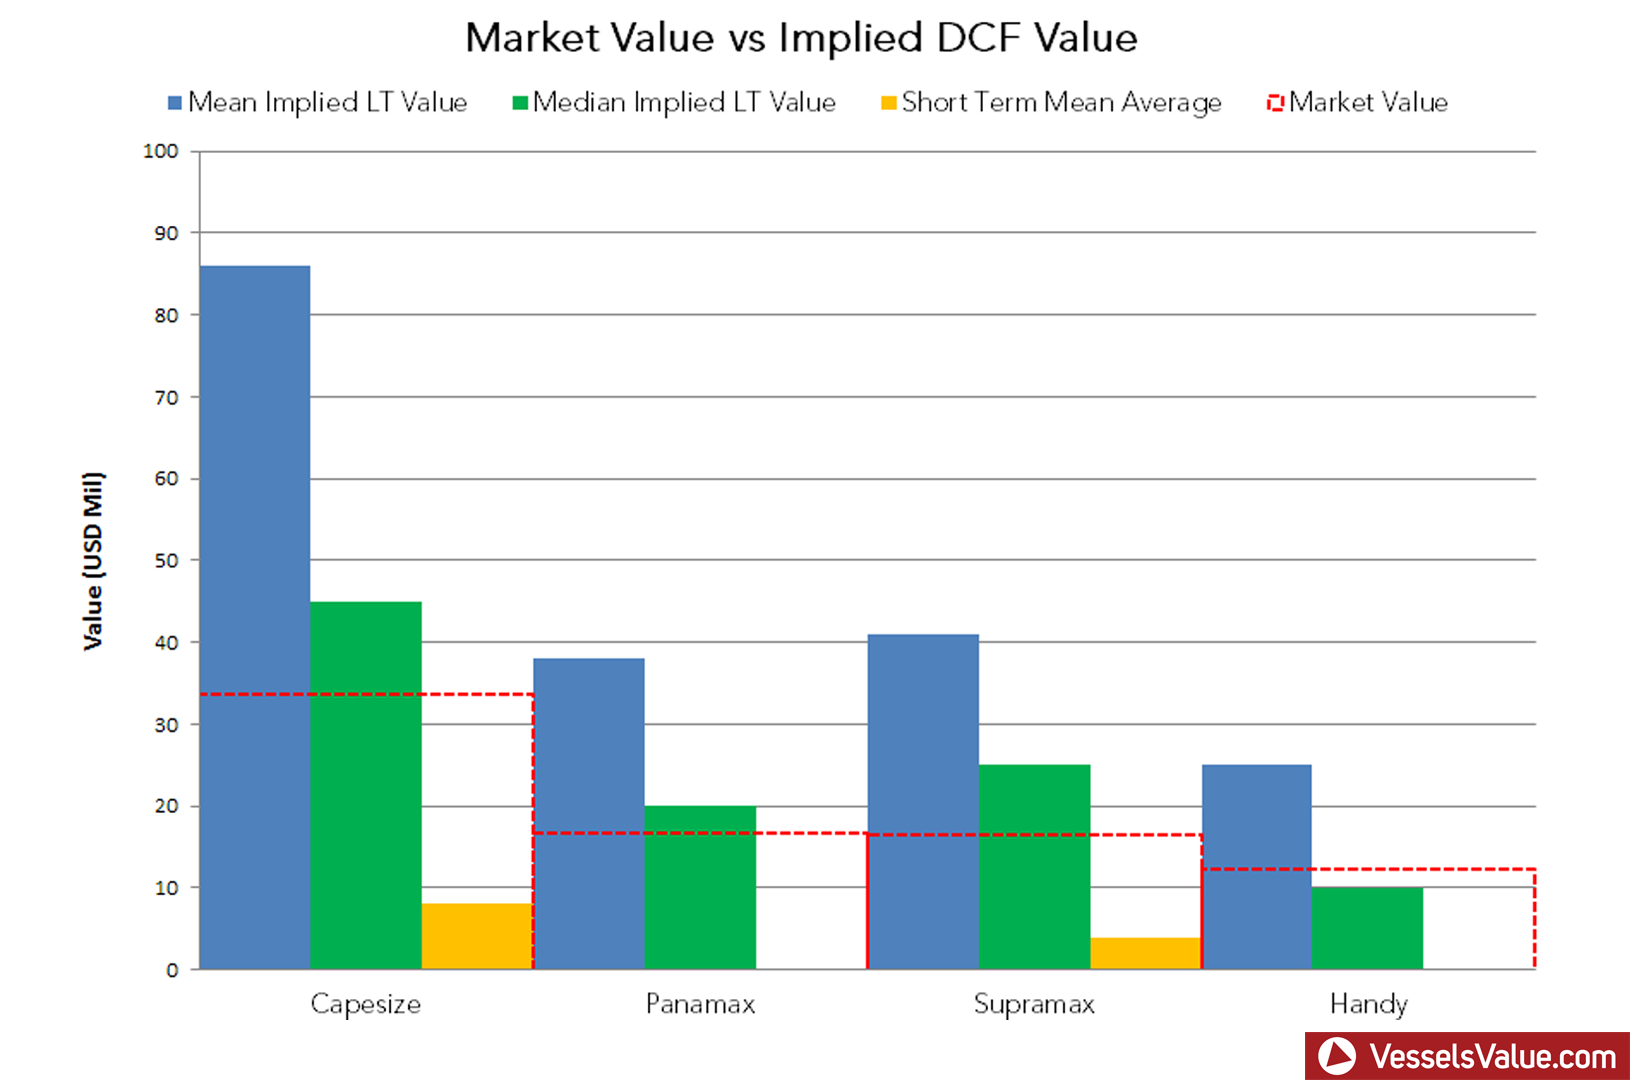 The wide differential between market value and long-term implied market value mean that capes and supras are bargains right now when compared to their earning potential.  [Data: VesselsValue.com]